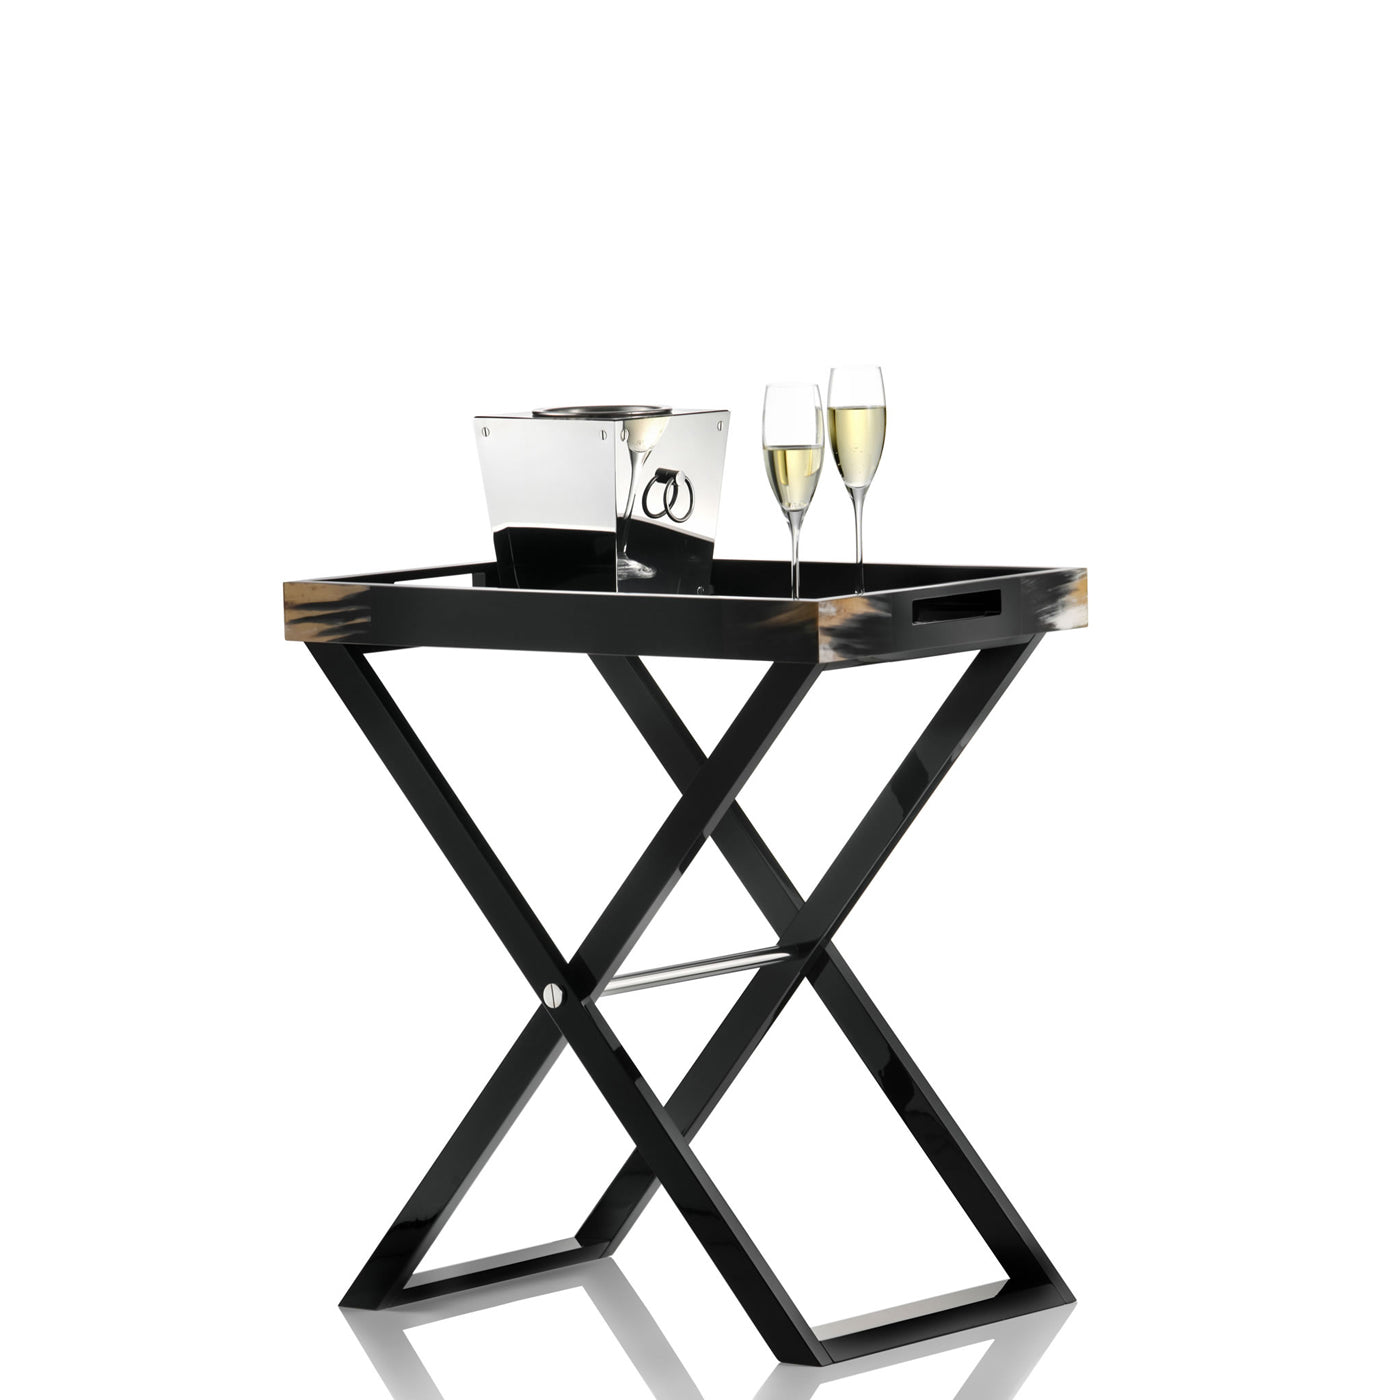 Elba Butlers Serving Table with Tray by Arcahorn | Crafted from dark horn, wood with a lacquered black gloss finish, and stainless steel. | Home Decor and Serveware | 2Jour Concierge, your luxury lifestyle shop